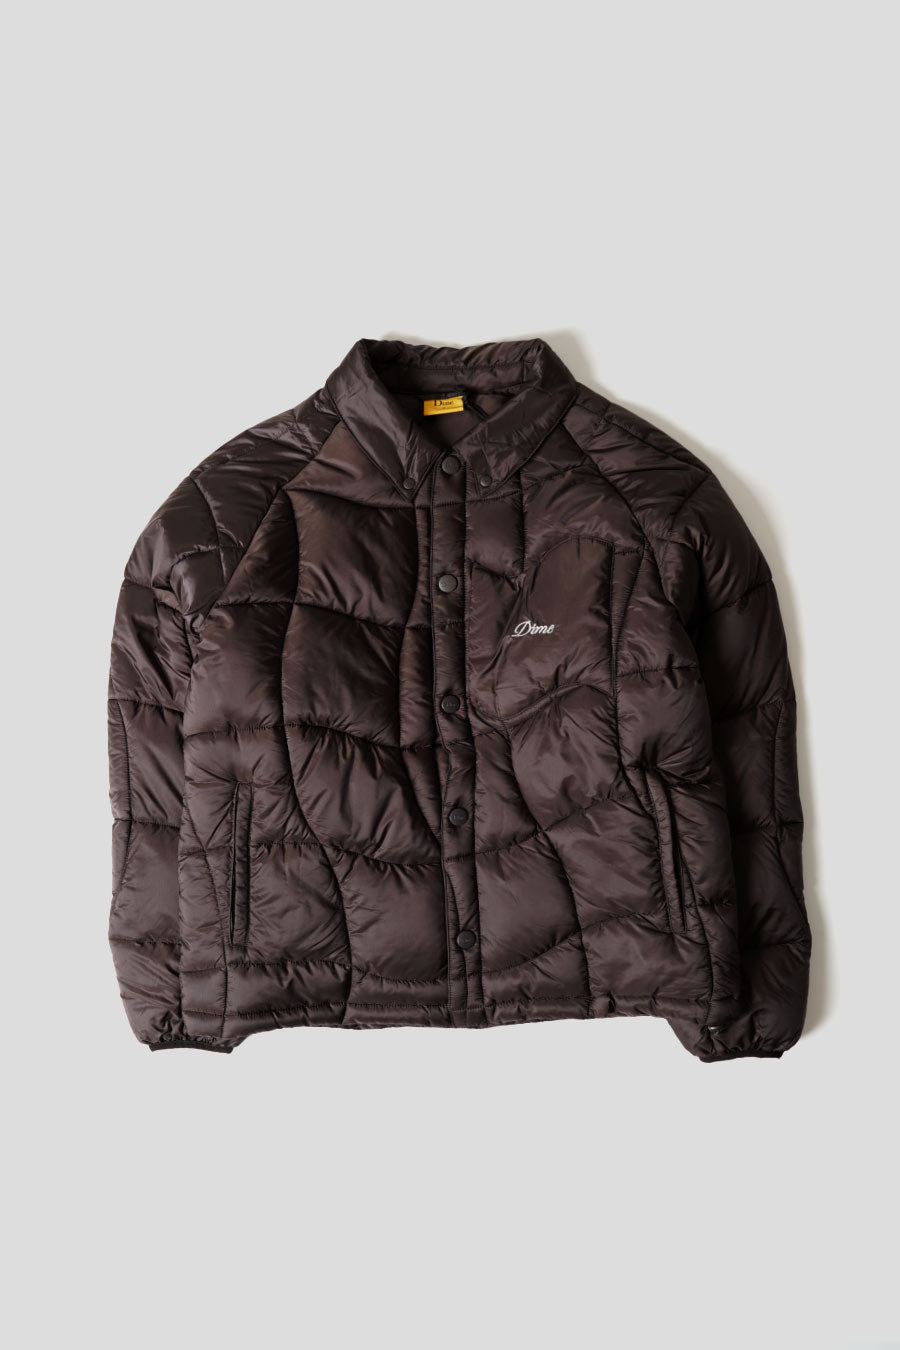 Dime - MIDWEIGHT WAVE PUFFER JACKET BROWN - LE LABO STORE